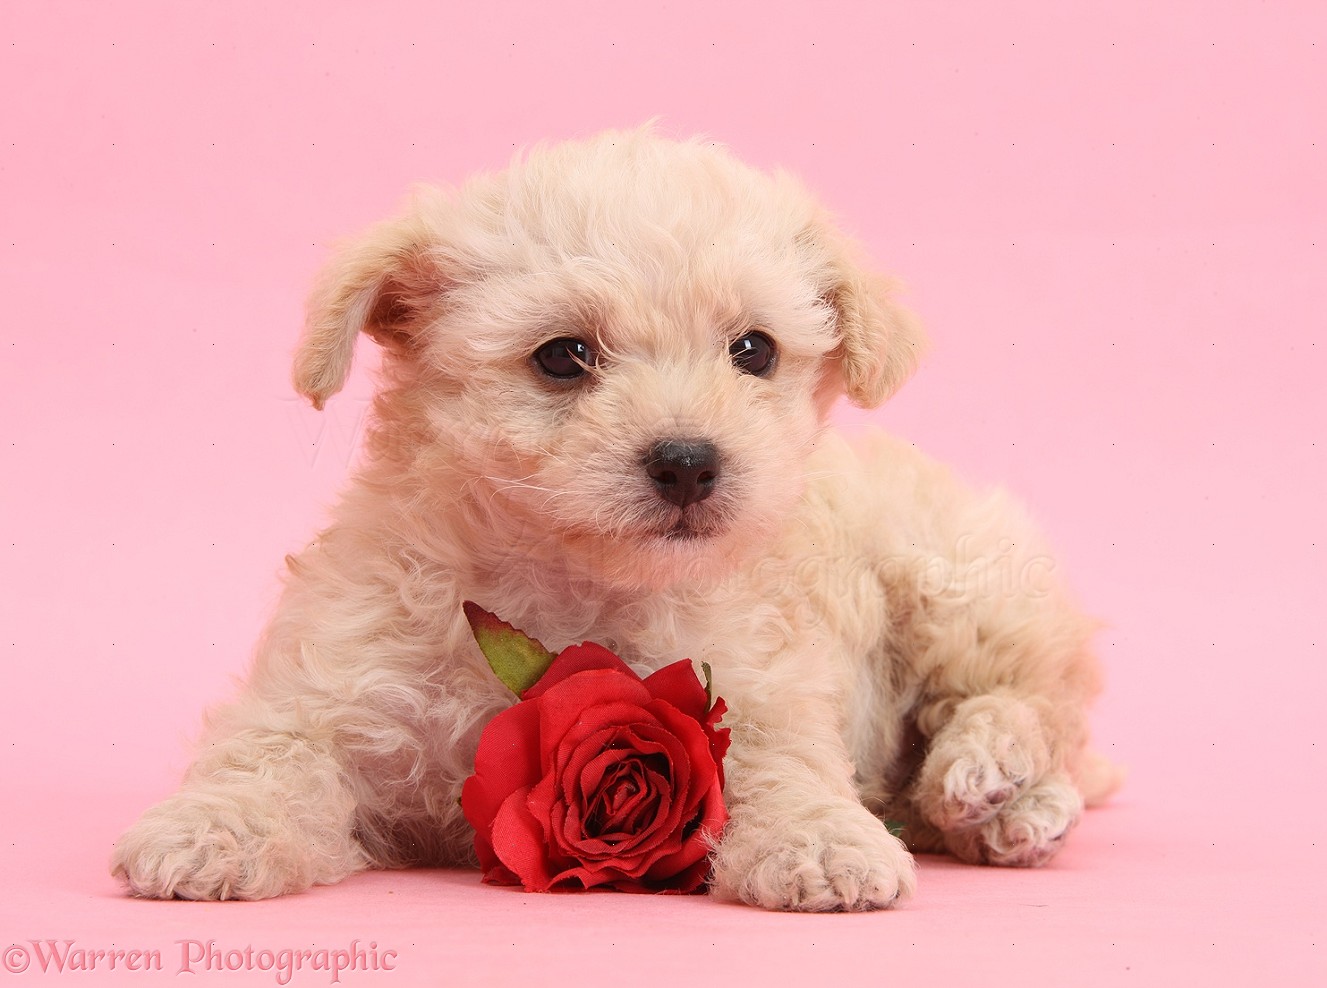 Dog: Cute Valentine puppy with rose on pink background photo WP35546